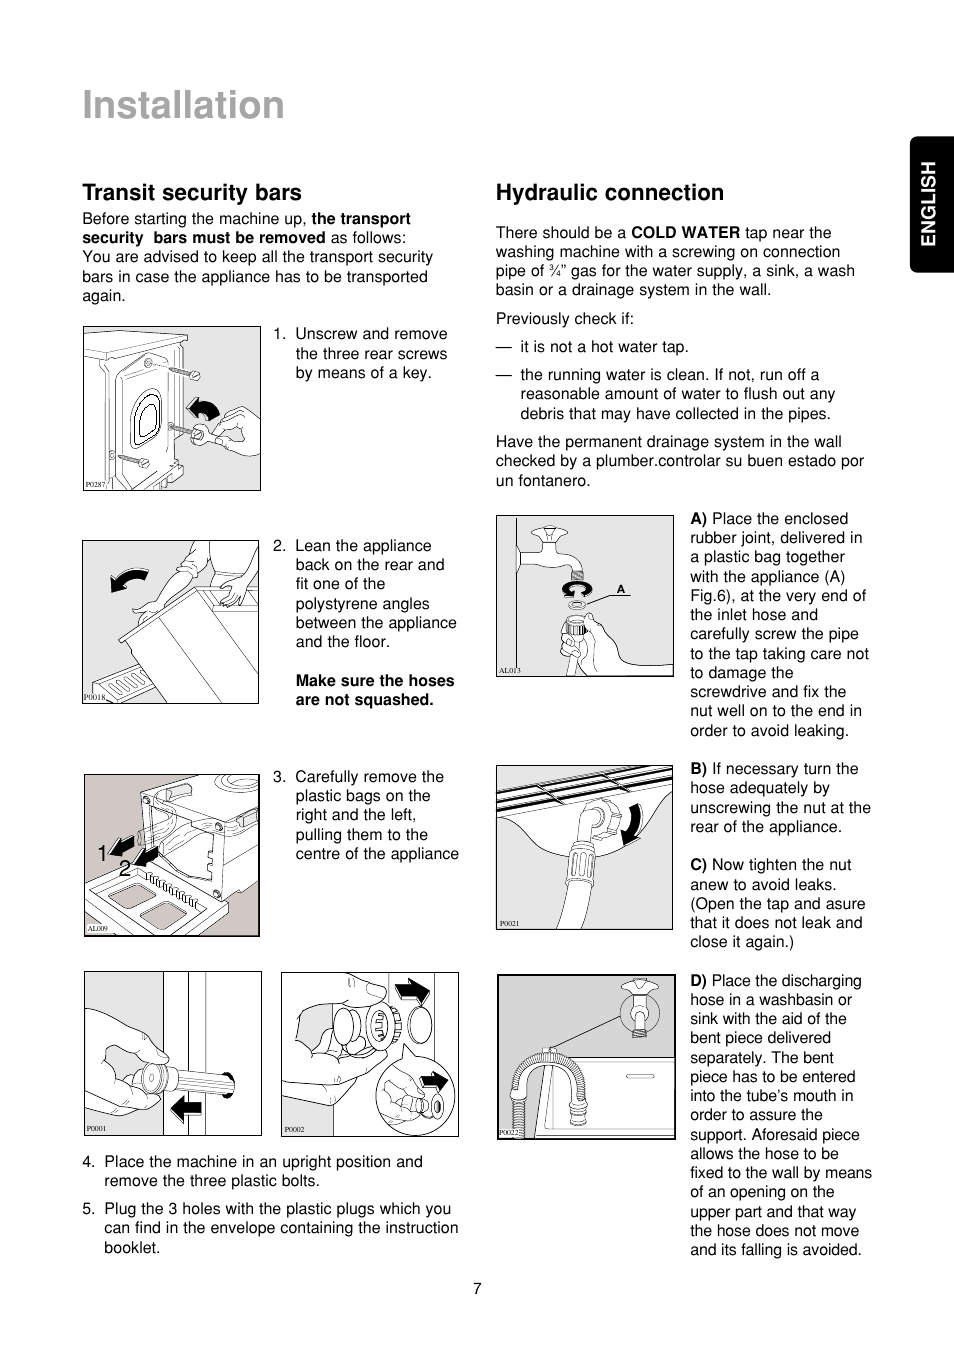 Installation, Transit security bars, Hydraulic connection | Zanussi FA 523  User Manual | Page 7 / 42 | Original mode